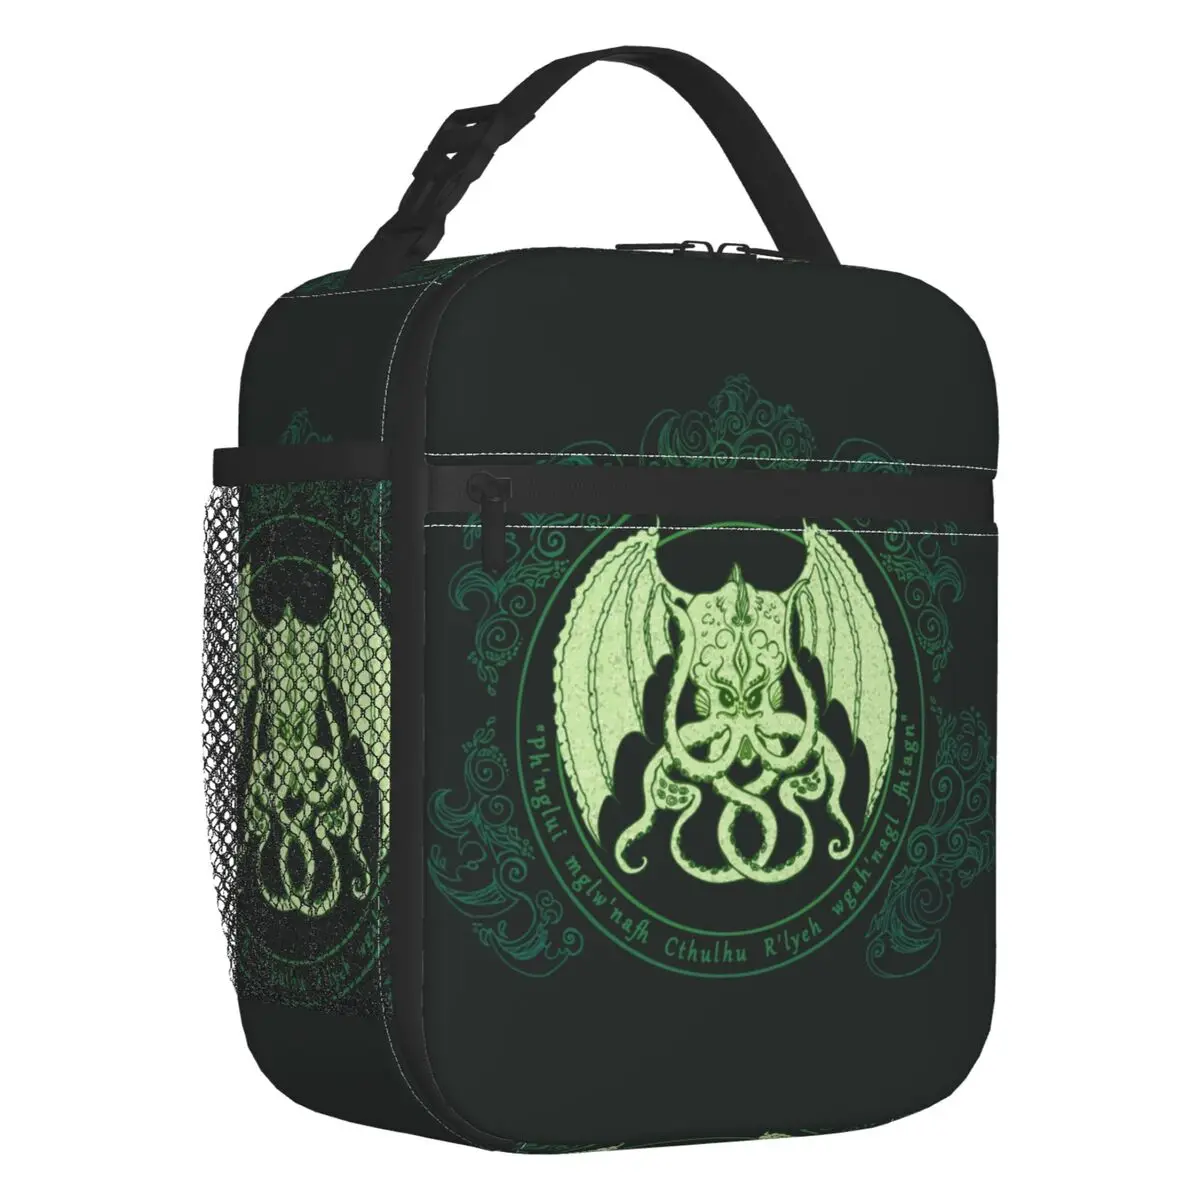 

The Call Of Cthulhu Lovecraft Insulated Lunch Bags Horror Octopus Tentacle Monster Portable Cooler Thermal Bento Box Work Travel